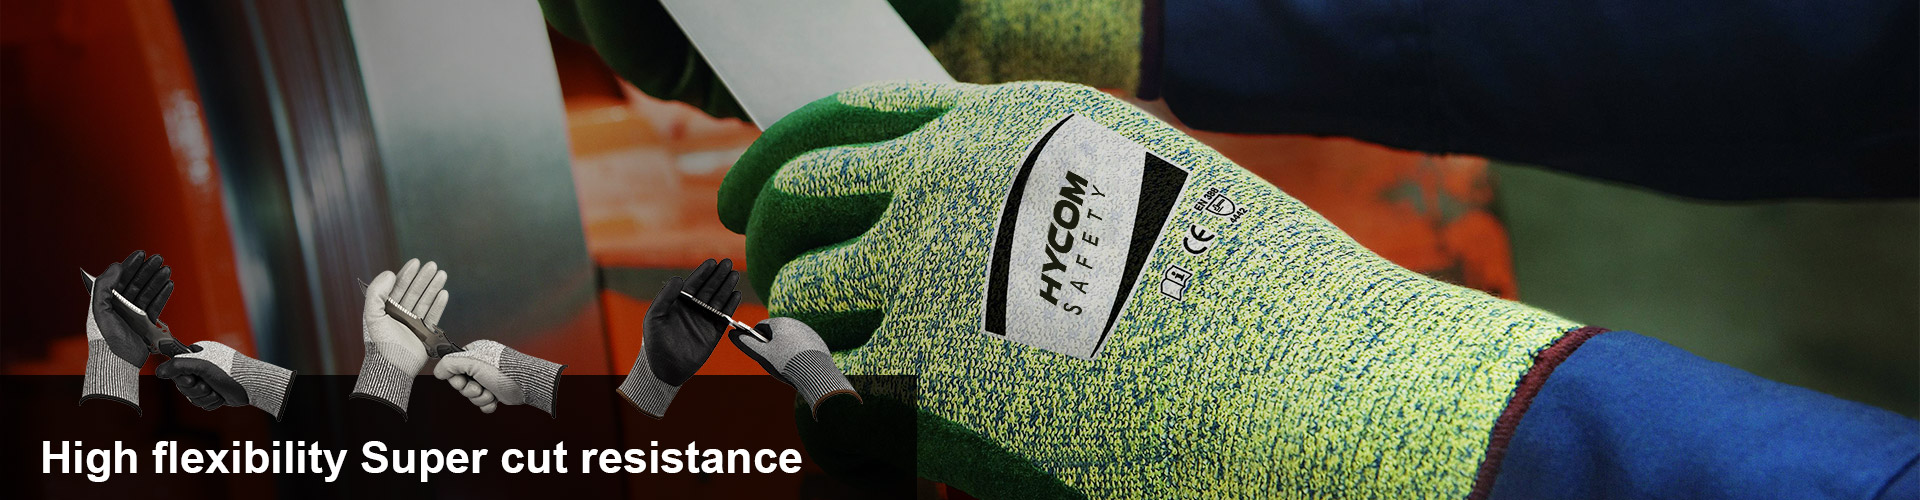 Cut resistant gloves for HVAC workers